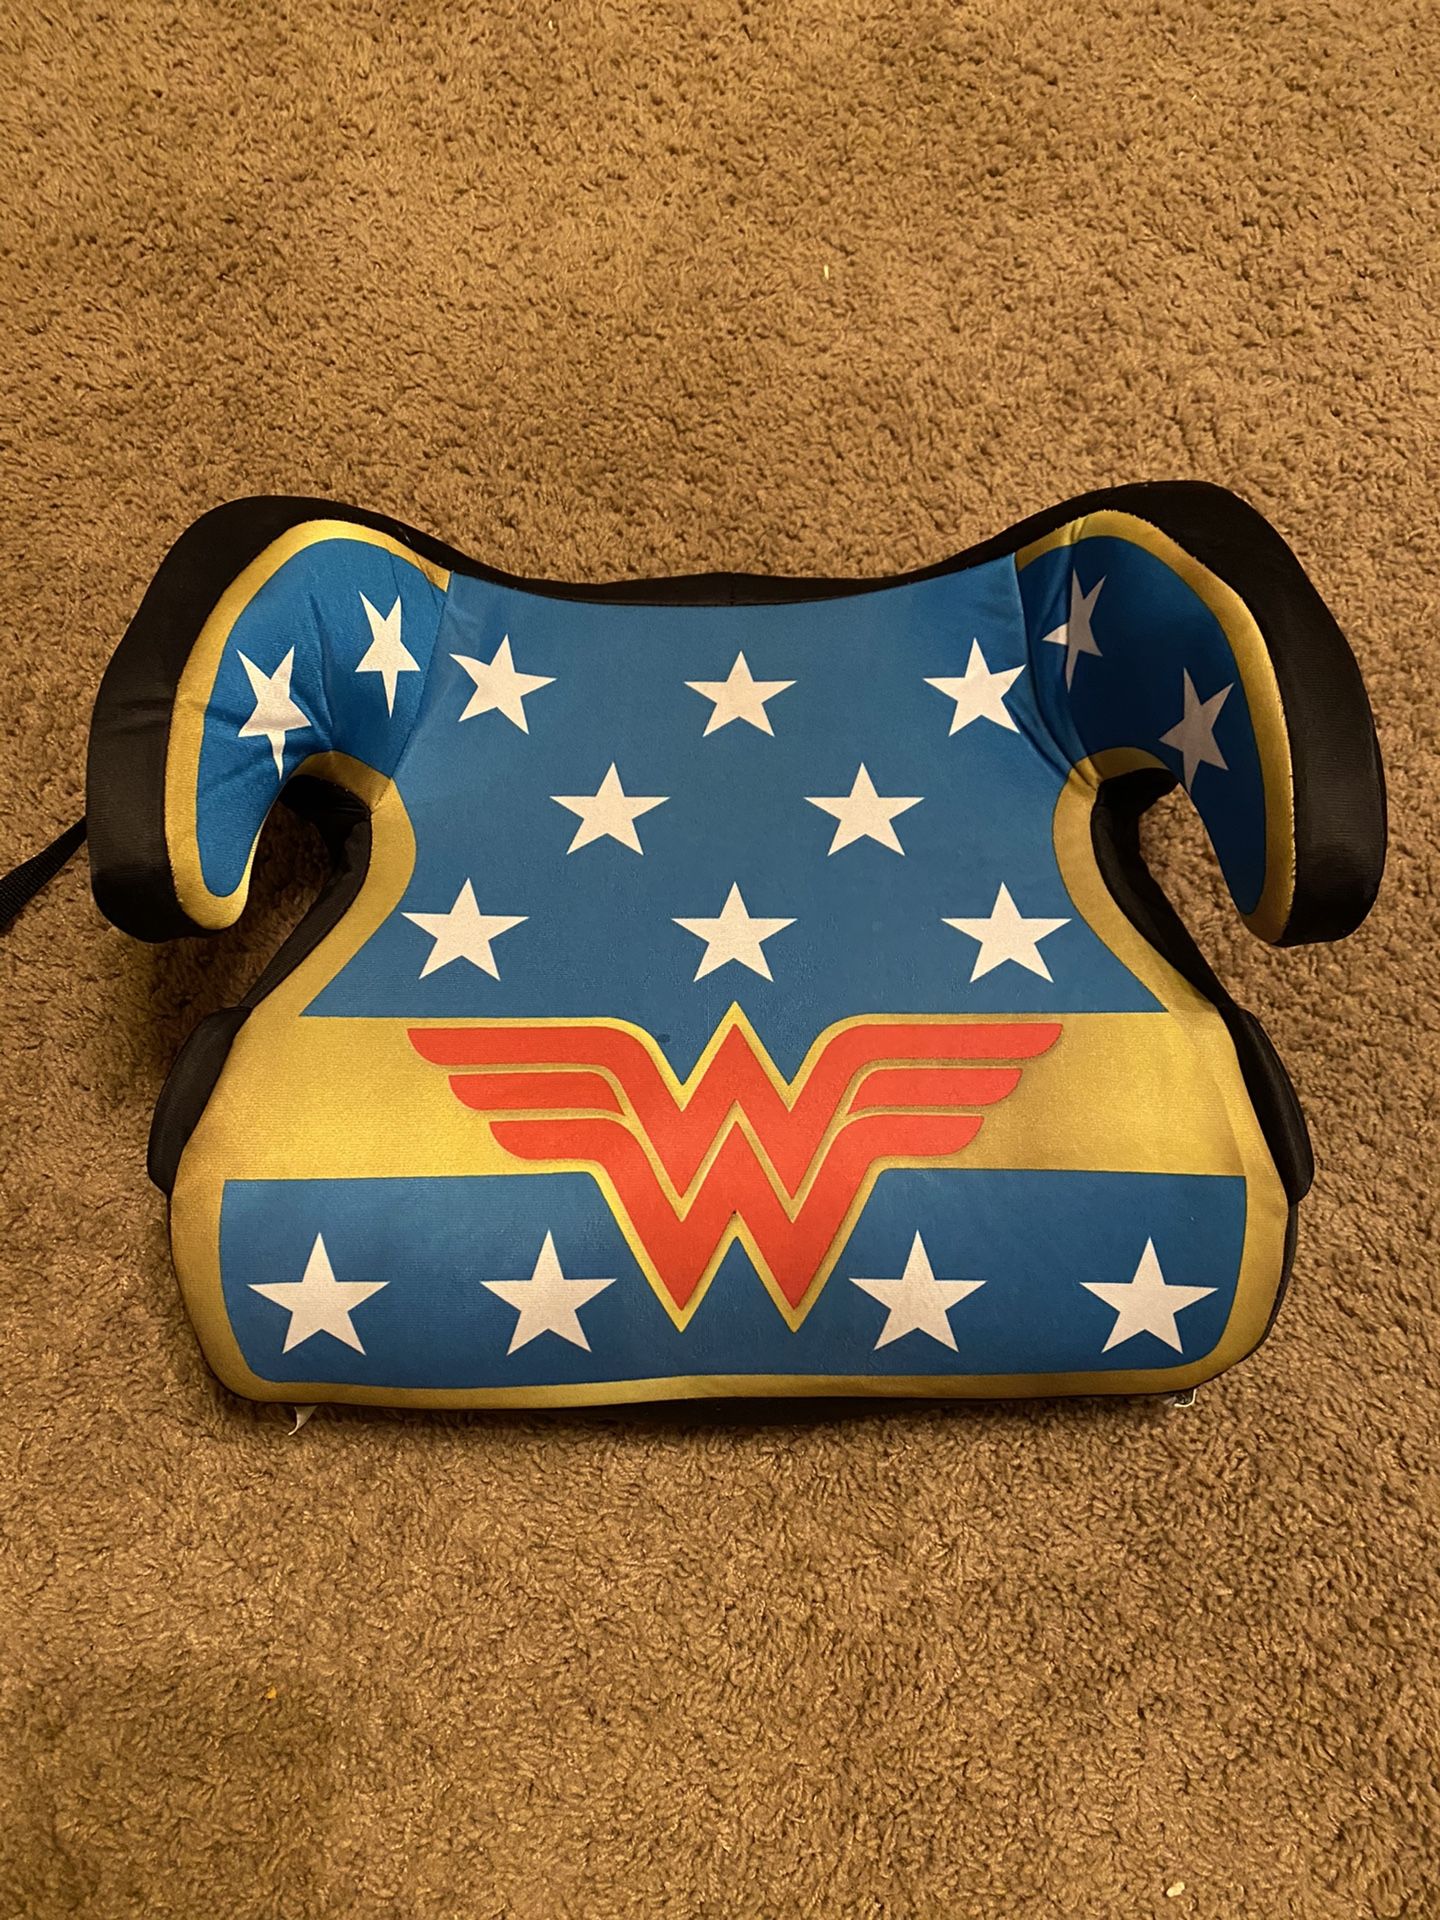 Wonder Woman Booster seat in good condition.